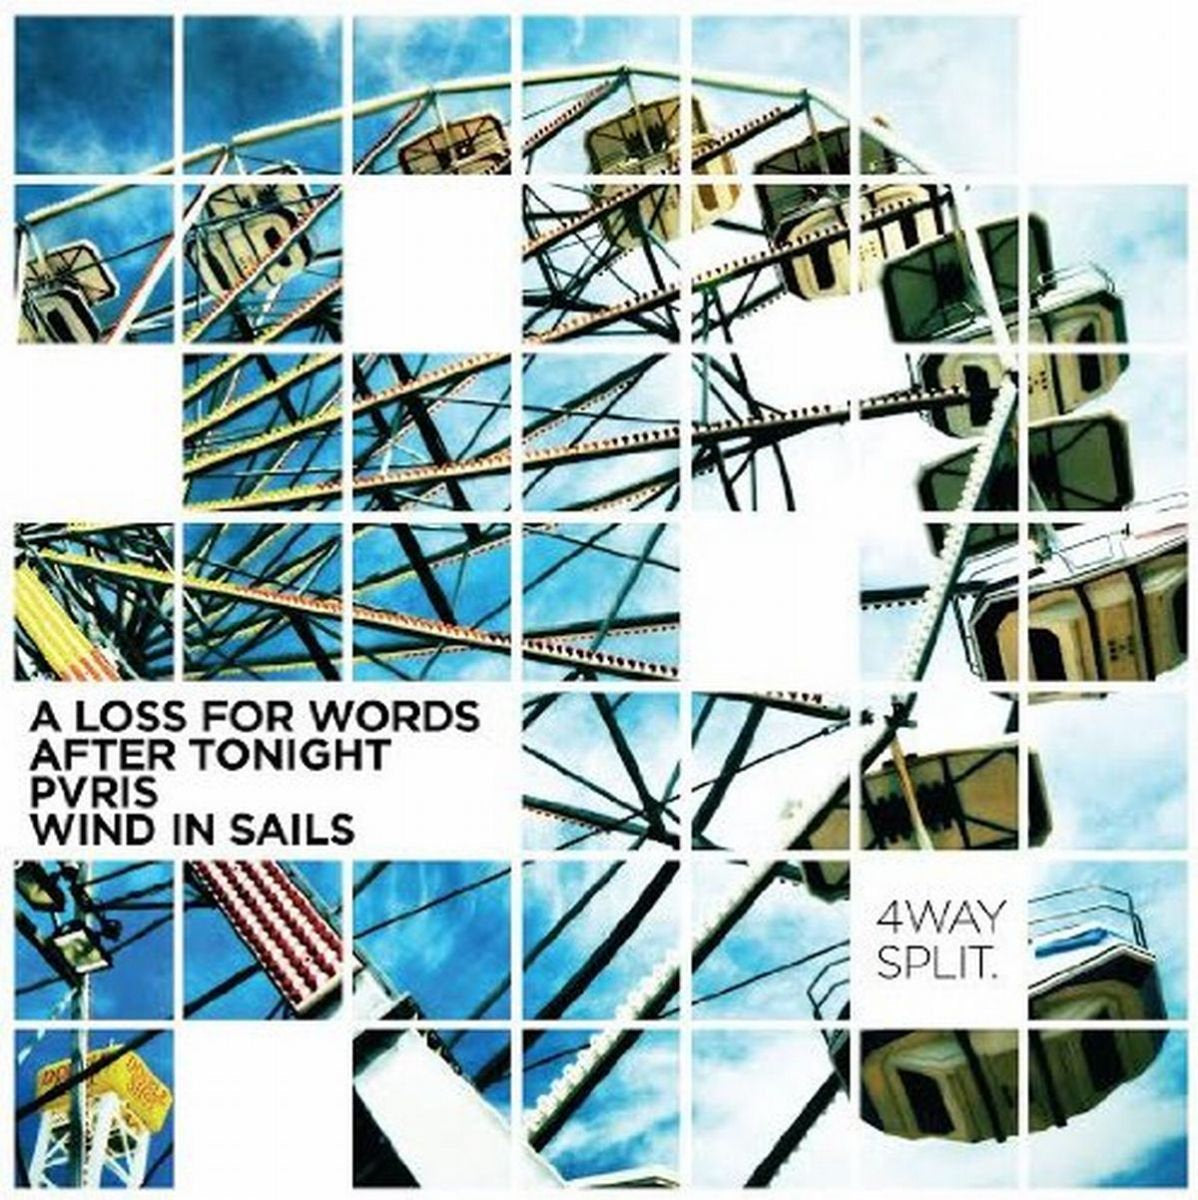 A Loss For Words / PVRIS / After Tonight / Wind In Sails "4 Way Split" CD